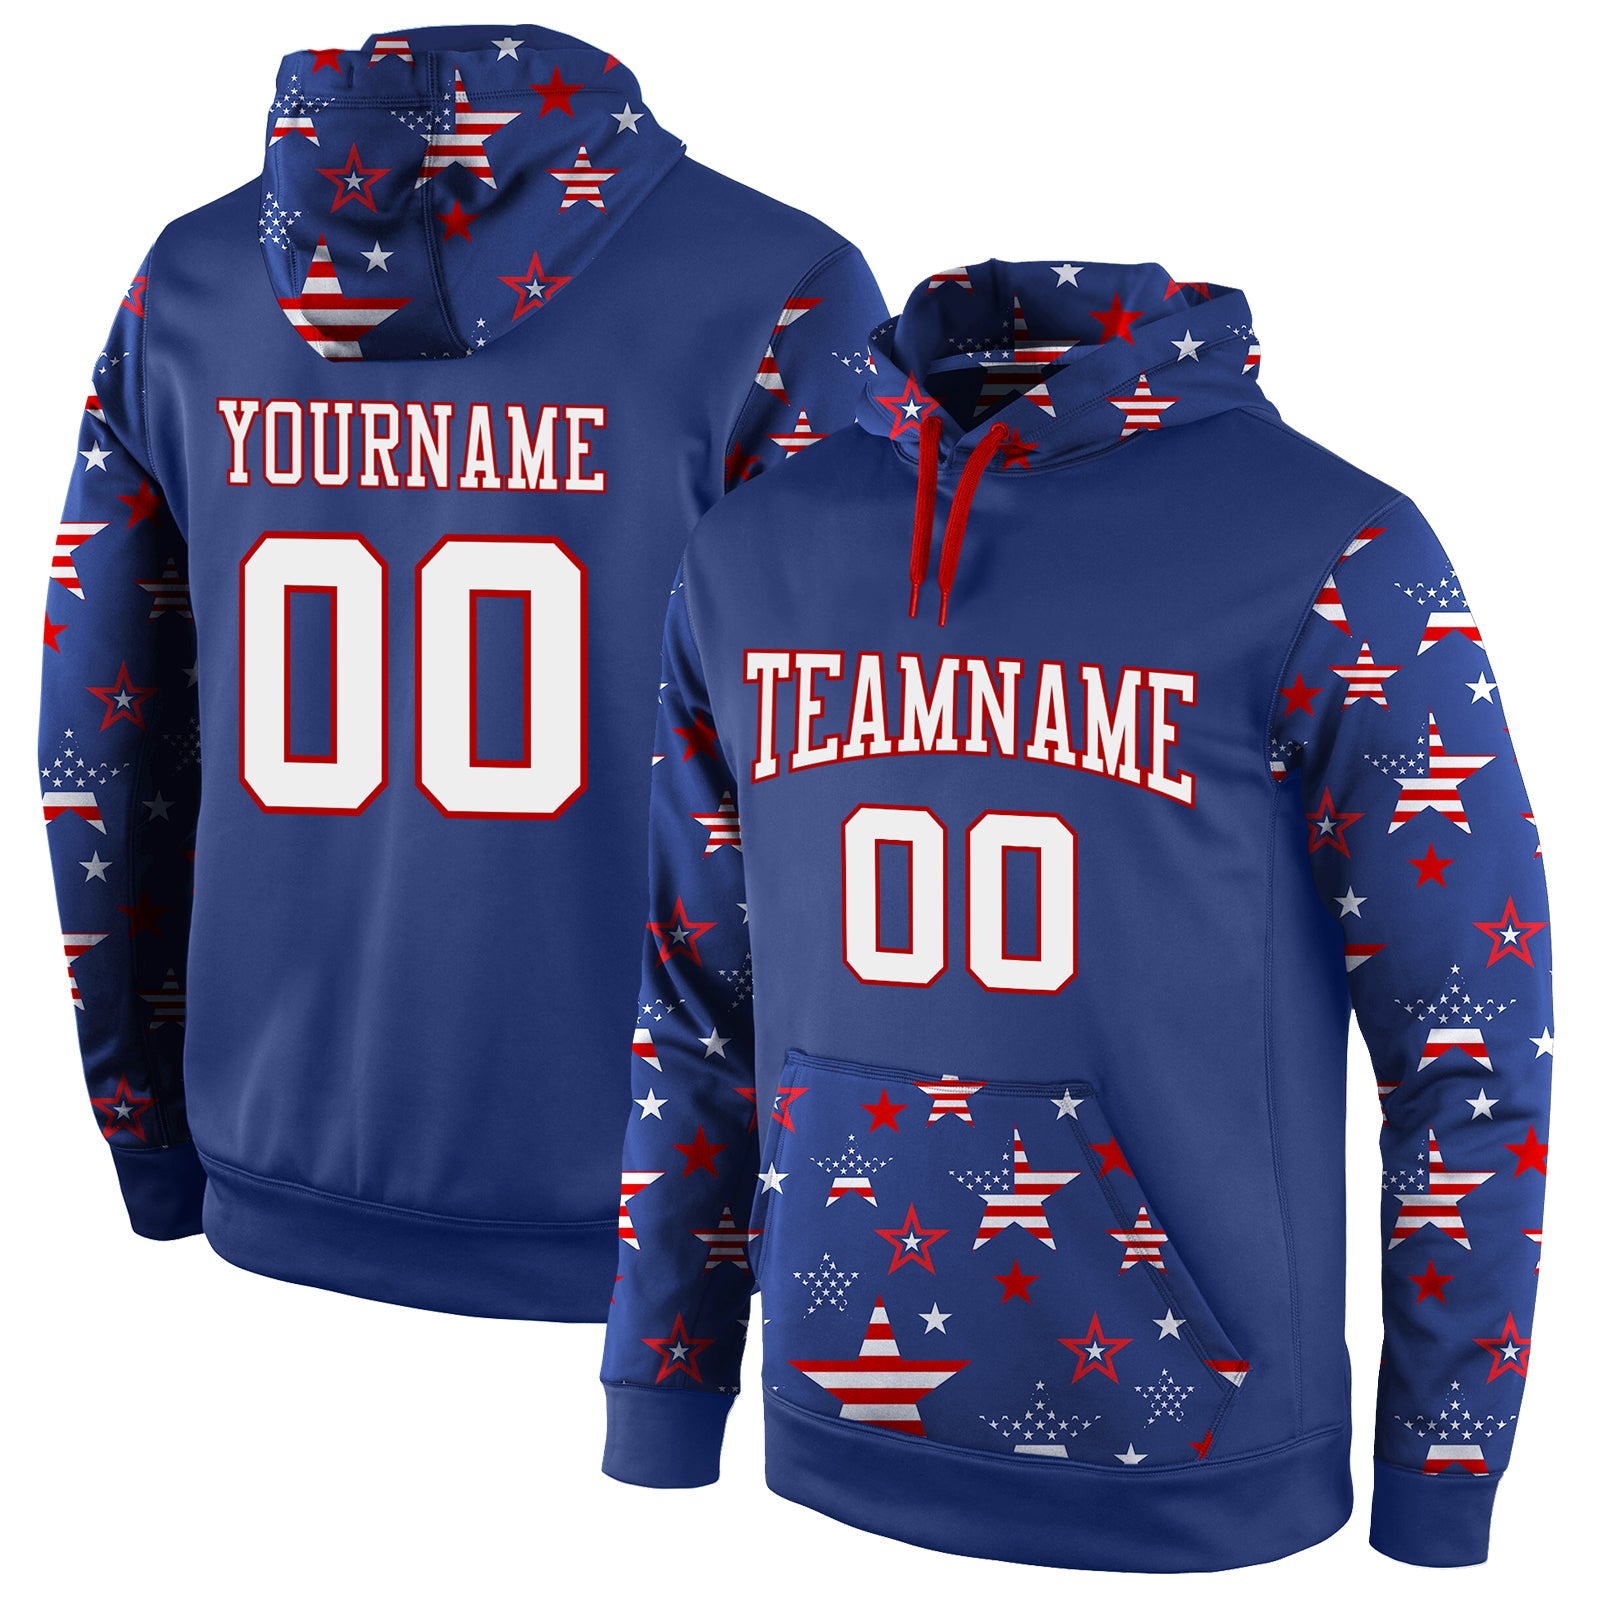 Custom Stitched Royal White-Red 3D American Flag Fashion Sports Pullover Sweatshirt Hoodie